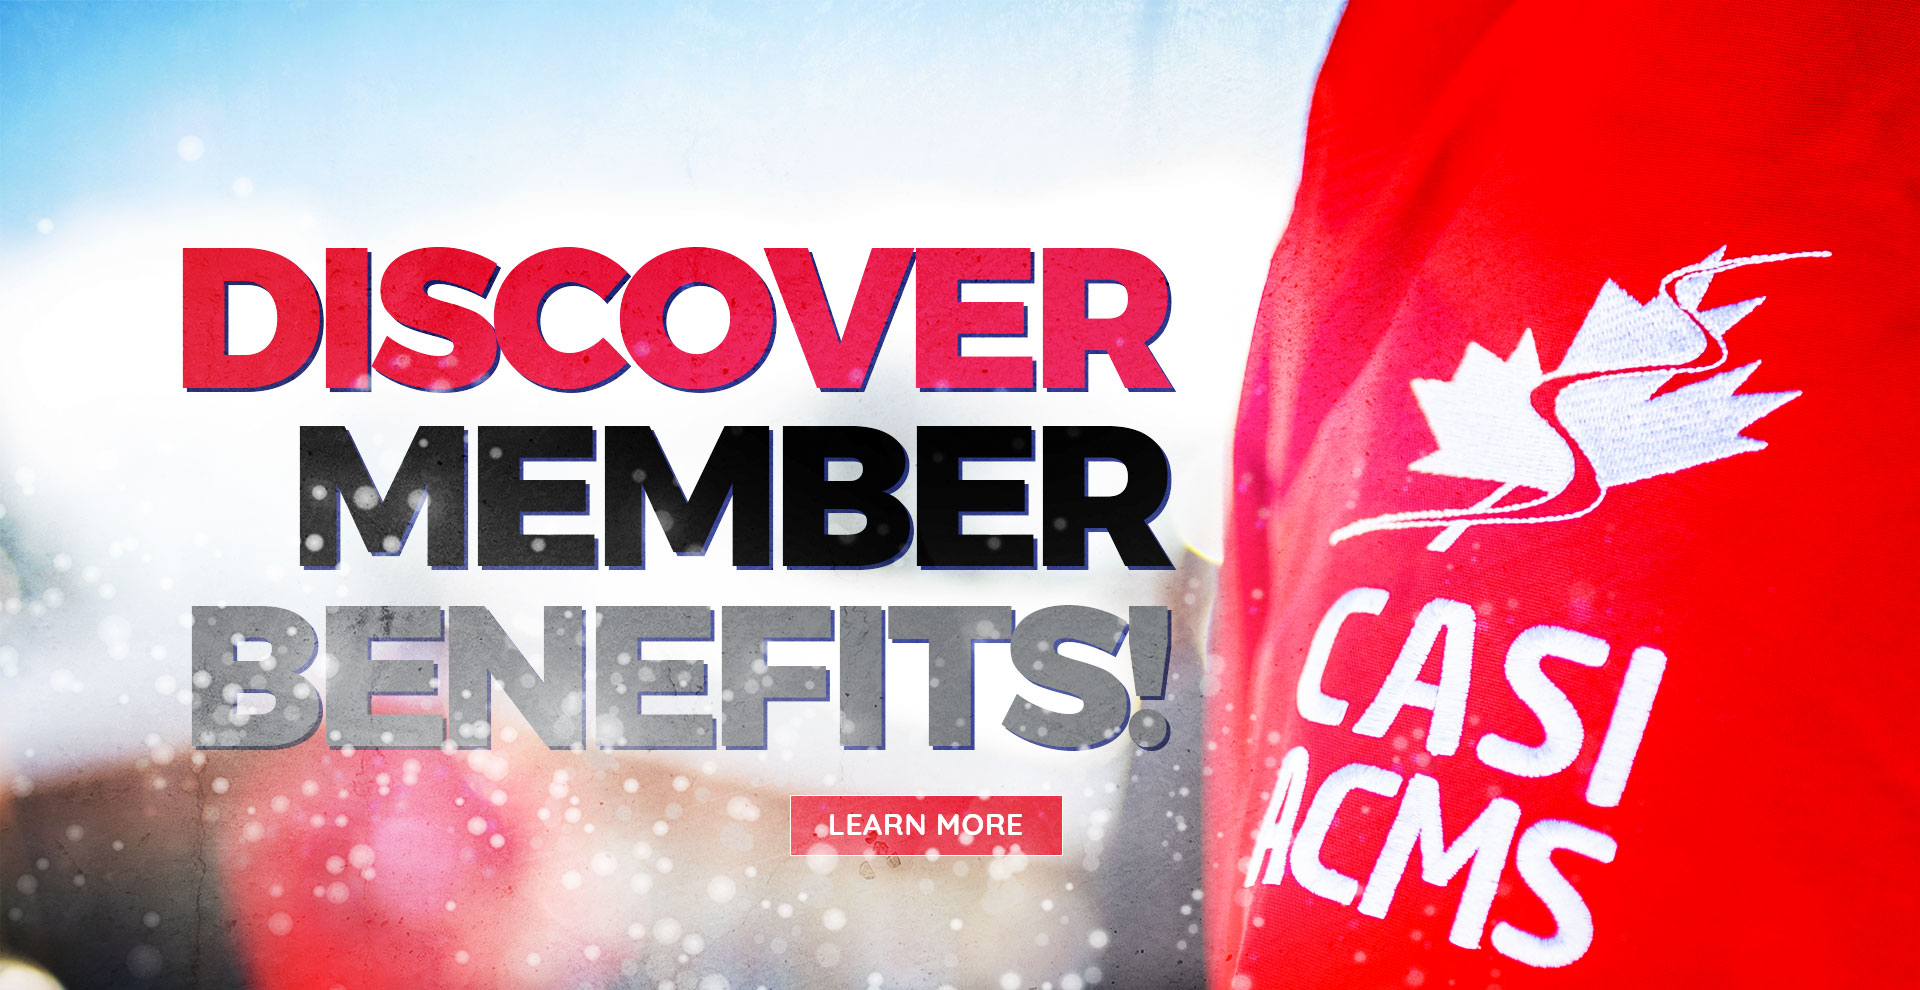 Discover Member Benefits!